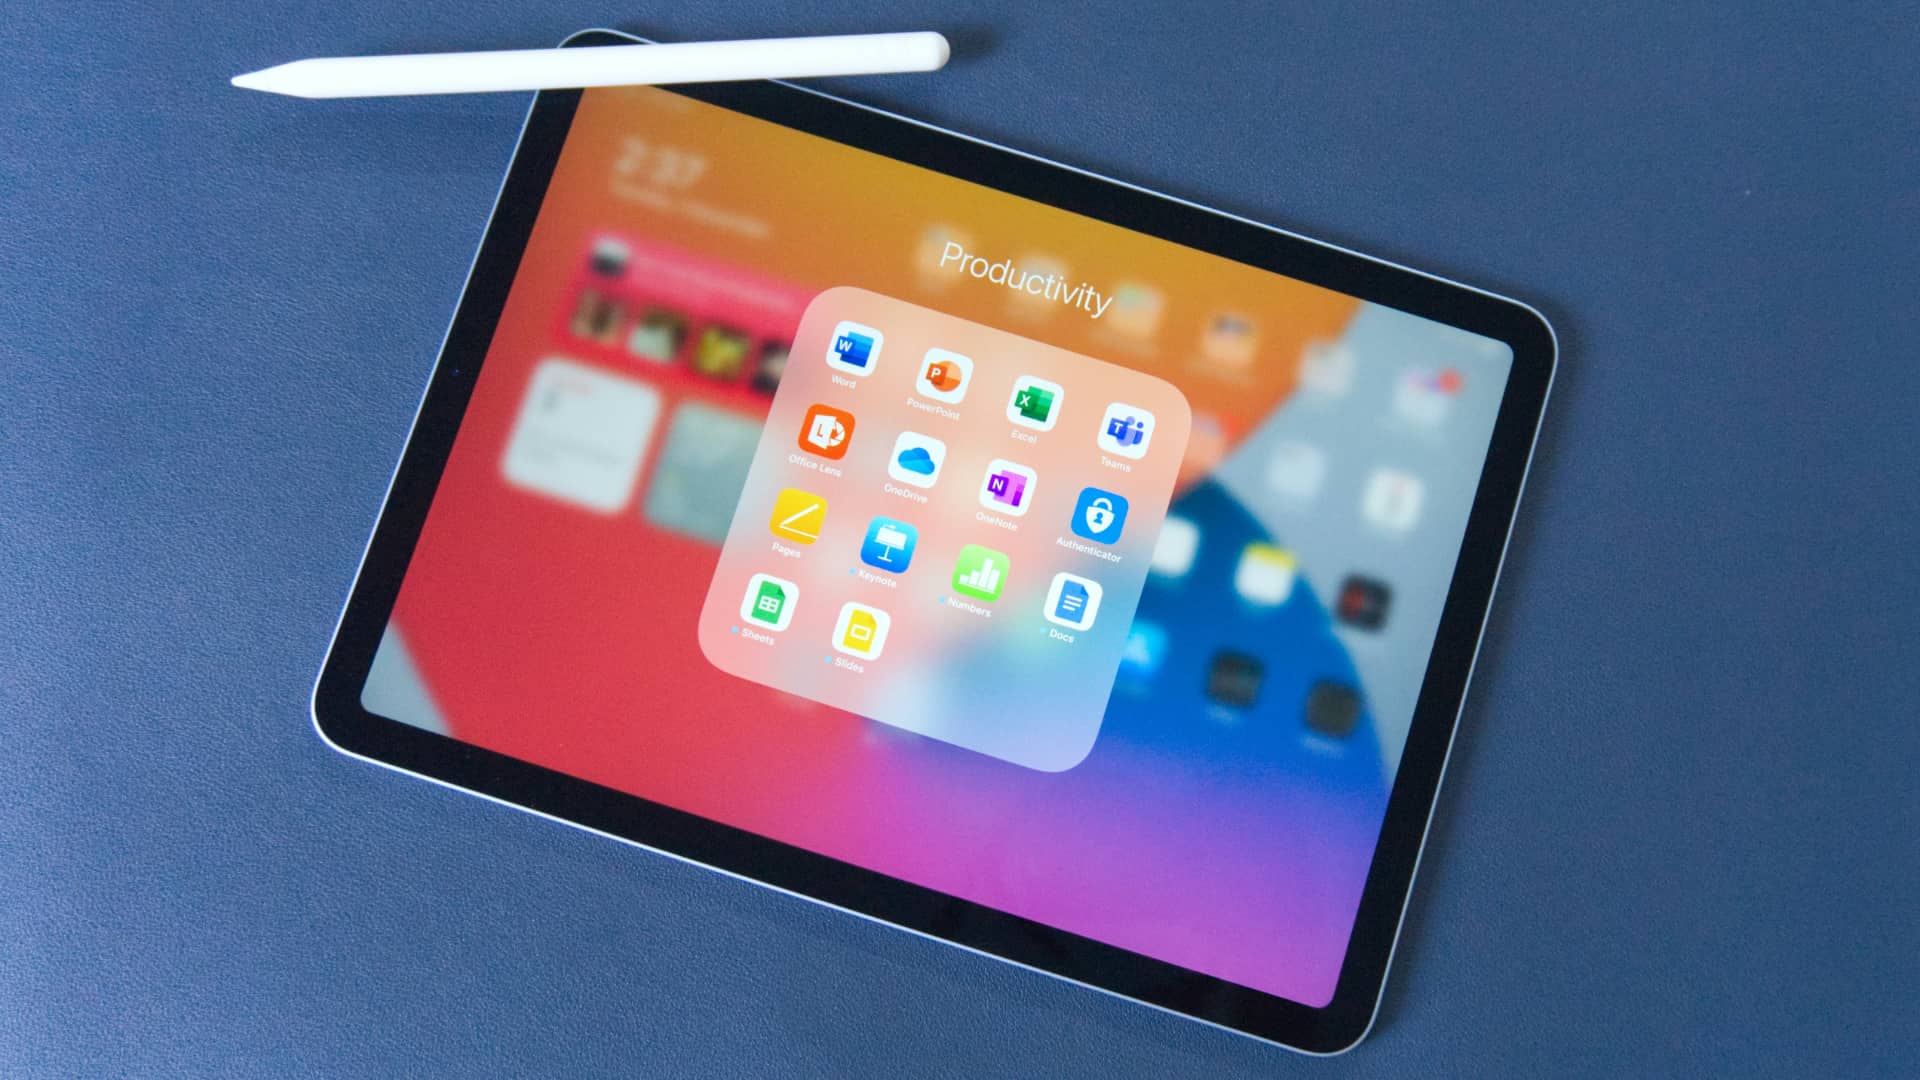 iPad Air laid on a blue leather desk pad, displaying a Productivity apps folder and having Apple Pencil magnetically attached along its edge